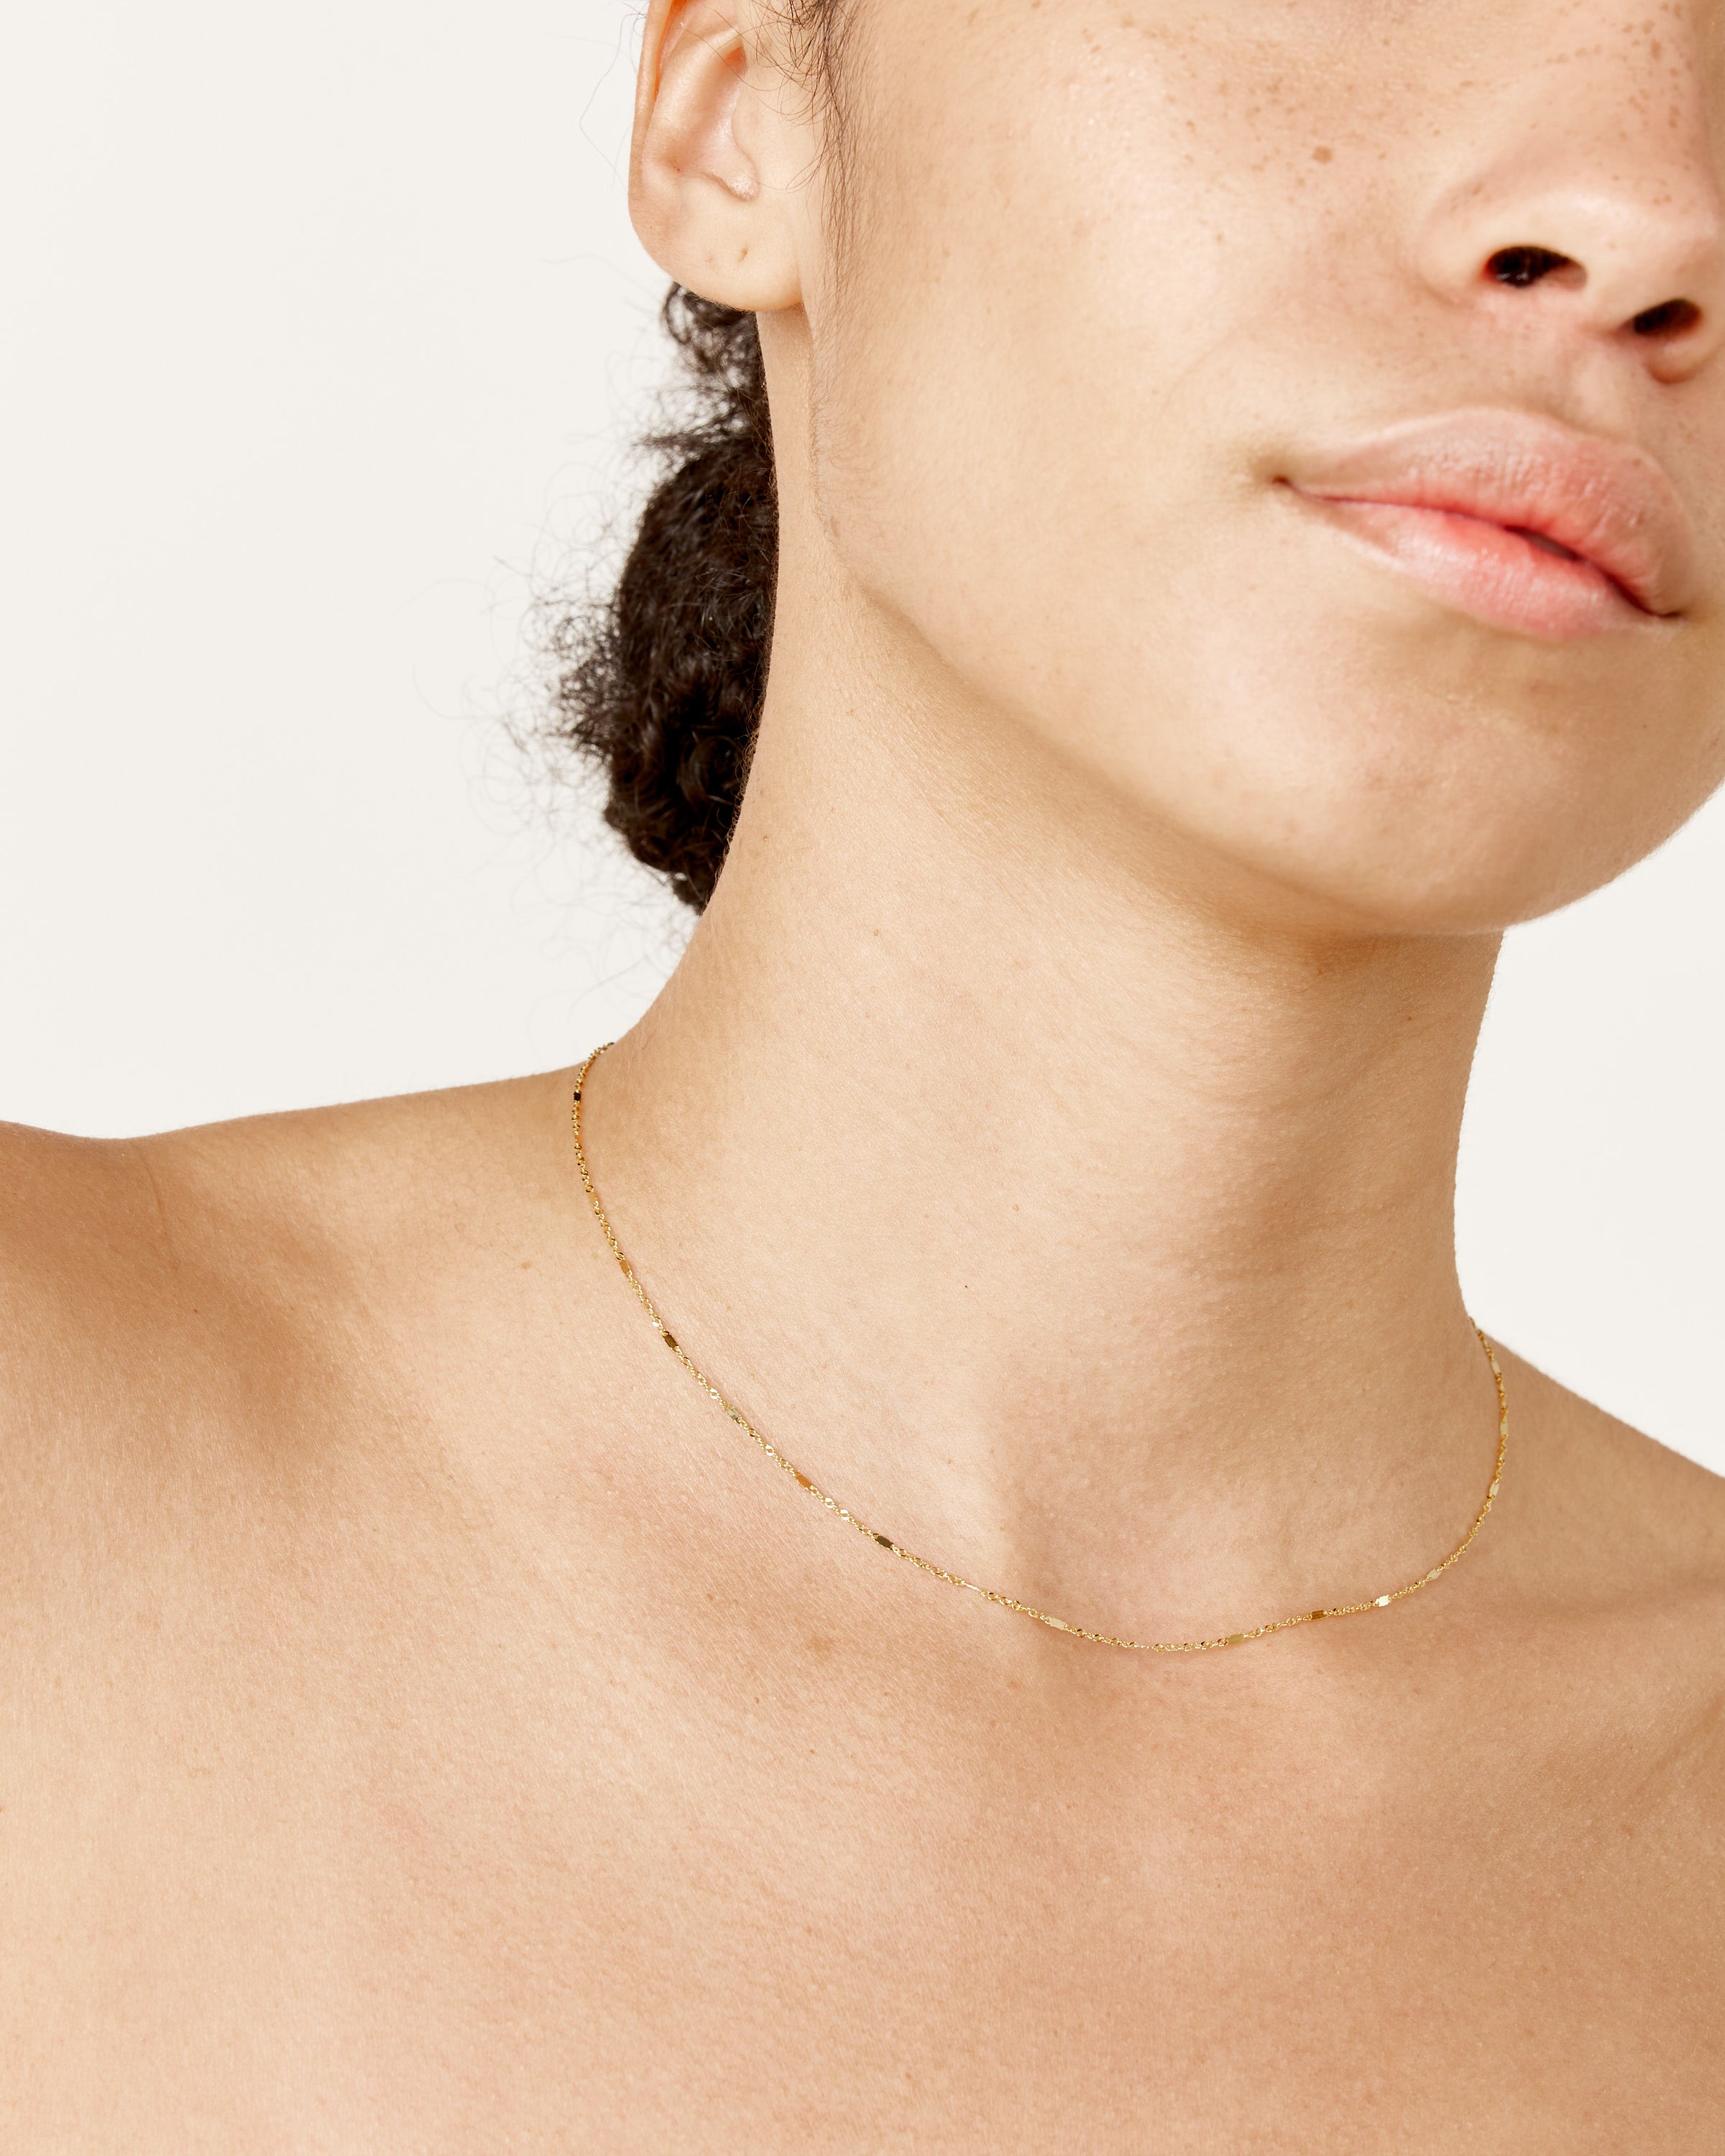 J.HOFFMAN'S Tiny Love Thin Chain Necklace